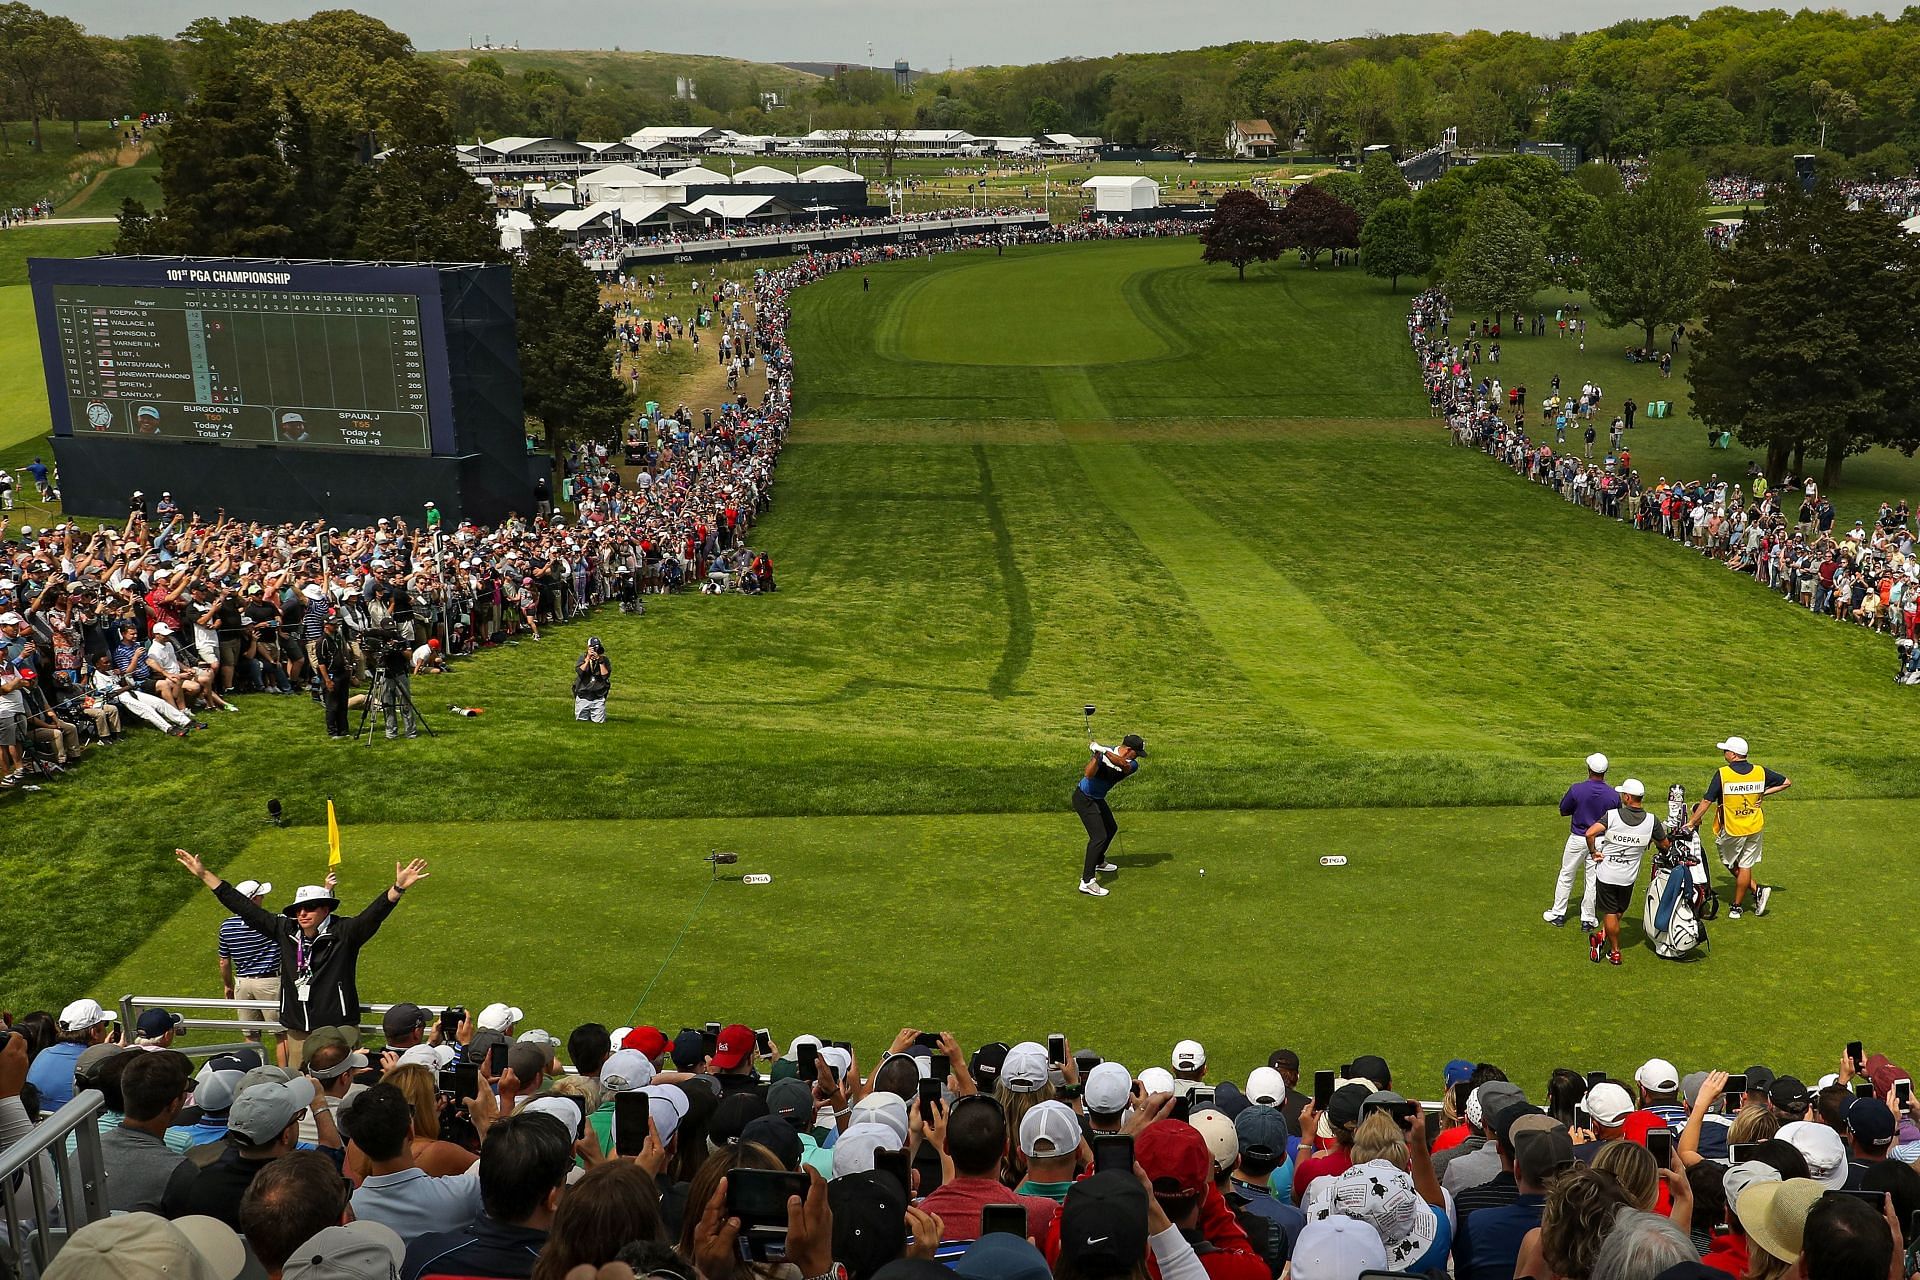 Where is Bethpage golf course? Exploring the venue for 2025 Ryder Cup